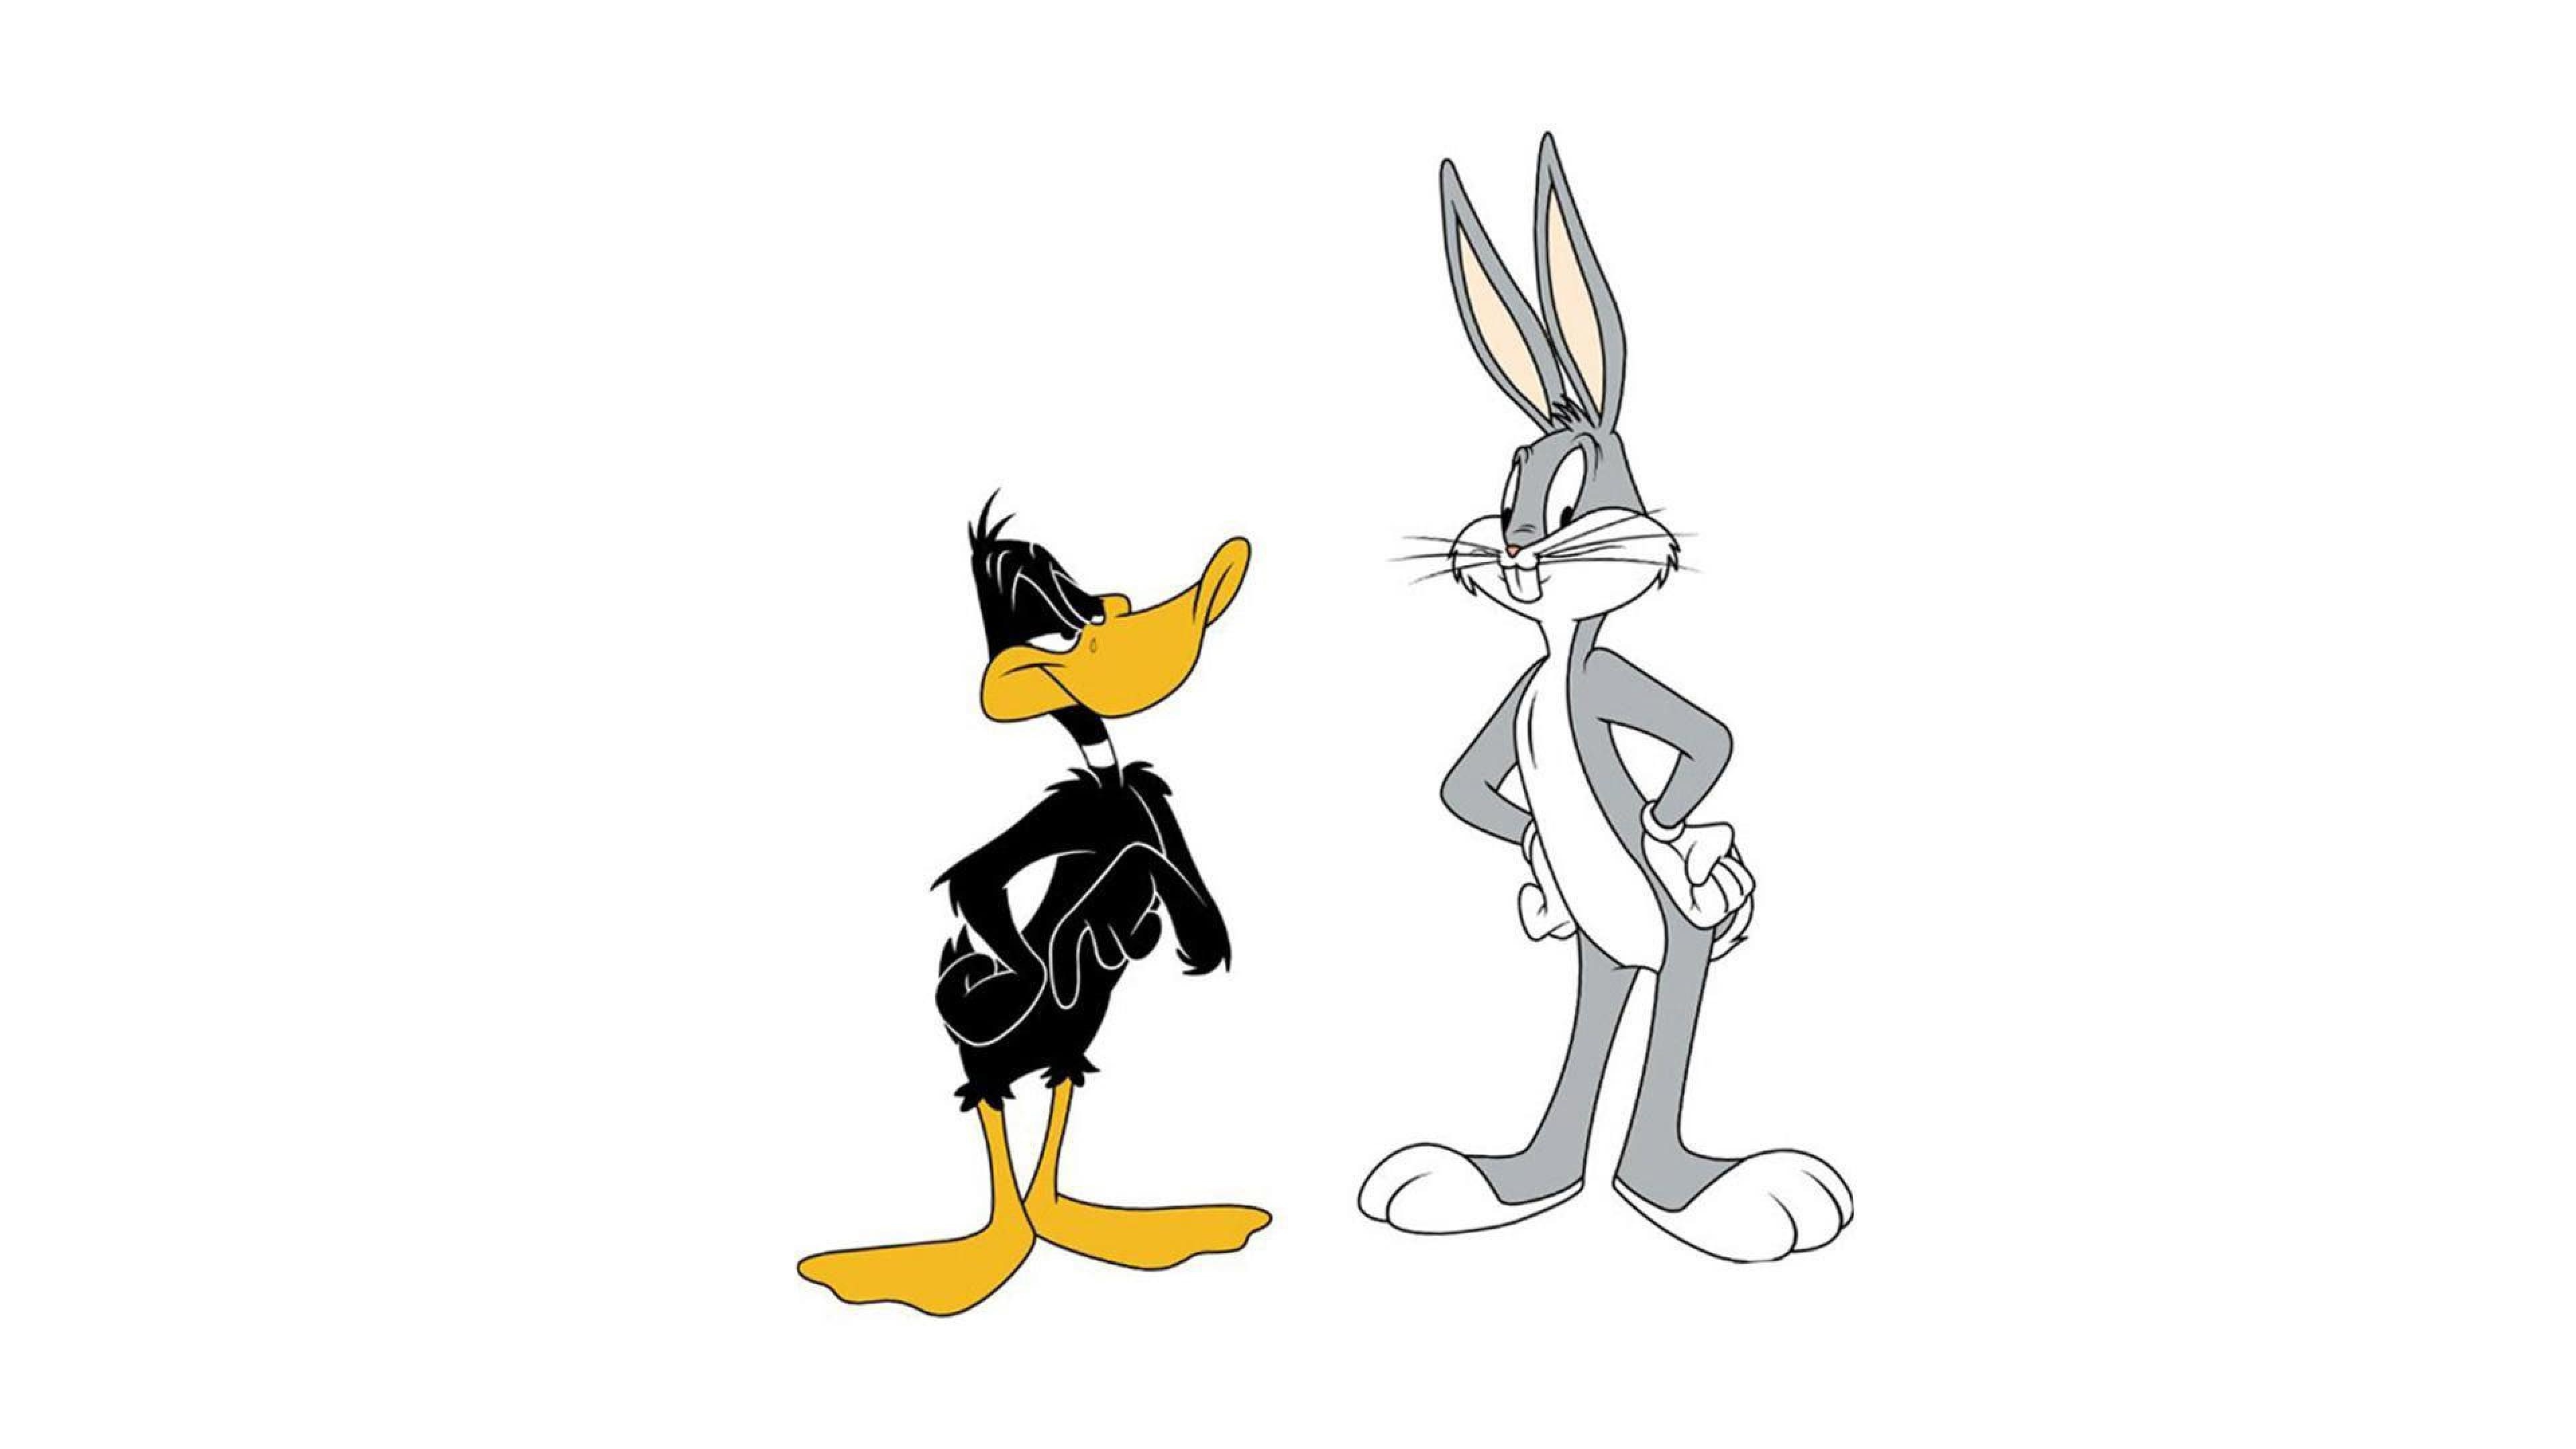 Bugs and Daffy wallpapers, Cartoon characters, HQ images, 3840x2160 4K Desktop